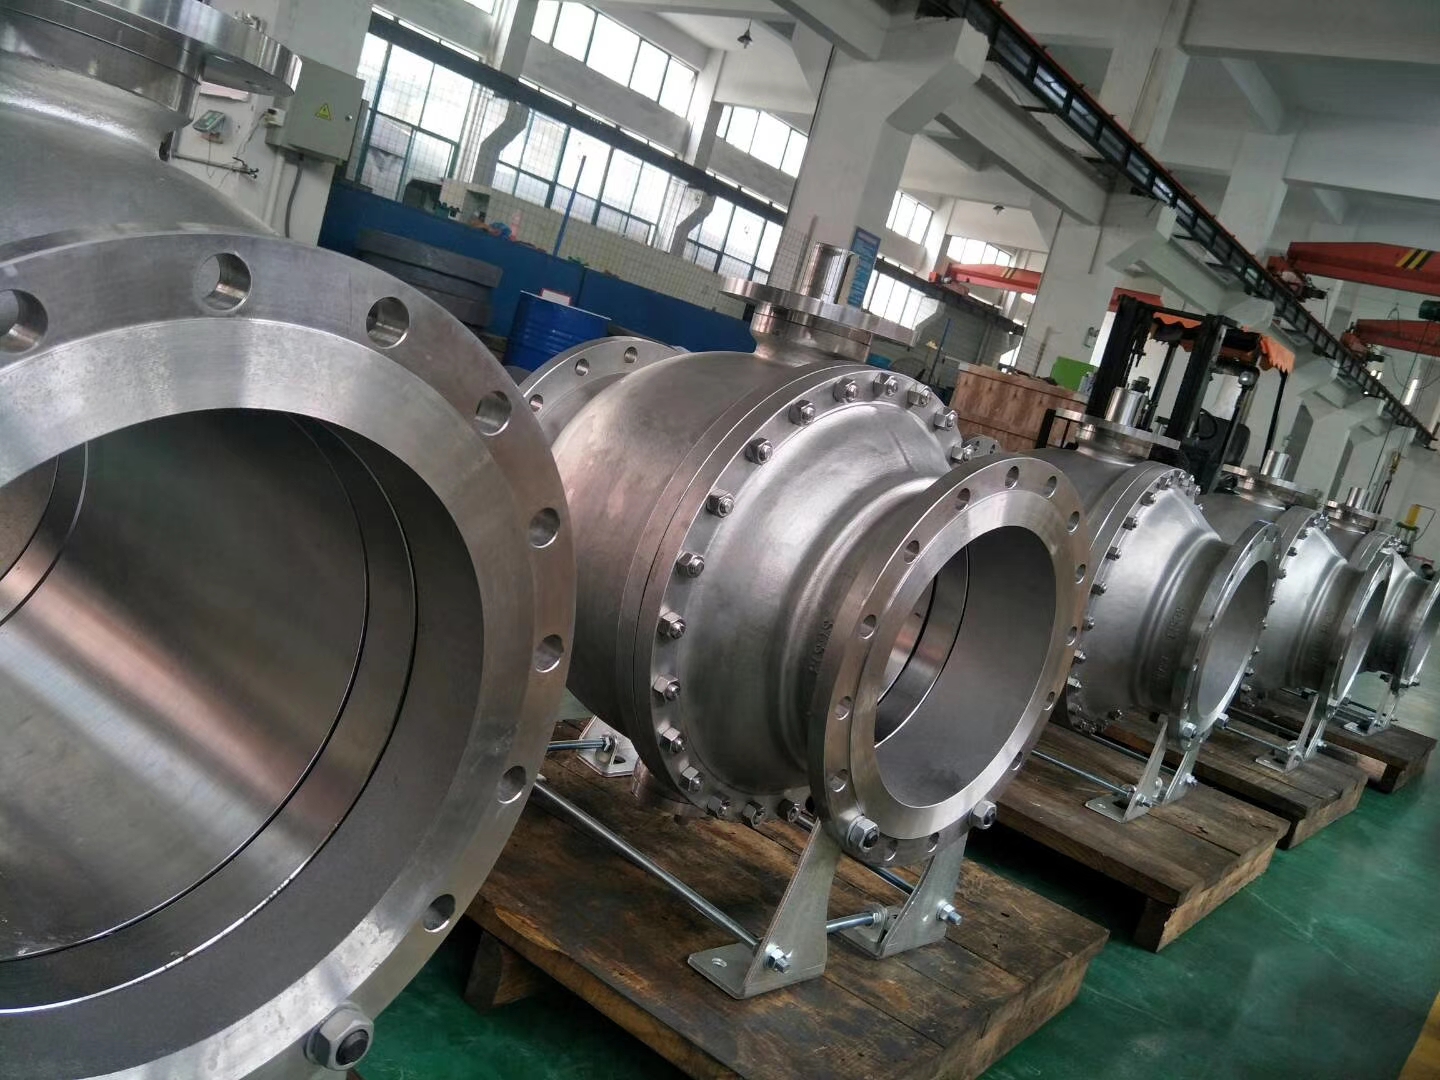 A batch of VITAL ball valve is ready for shipment